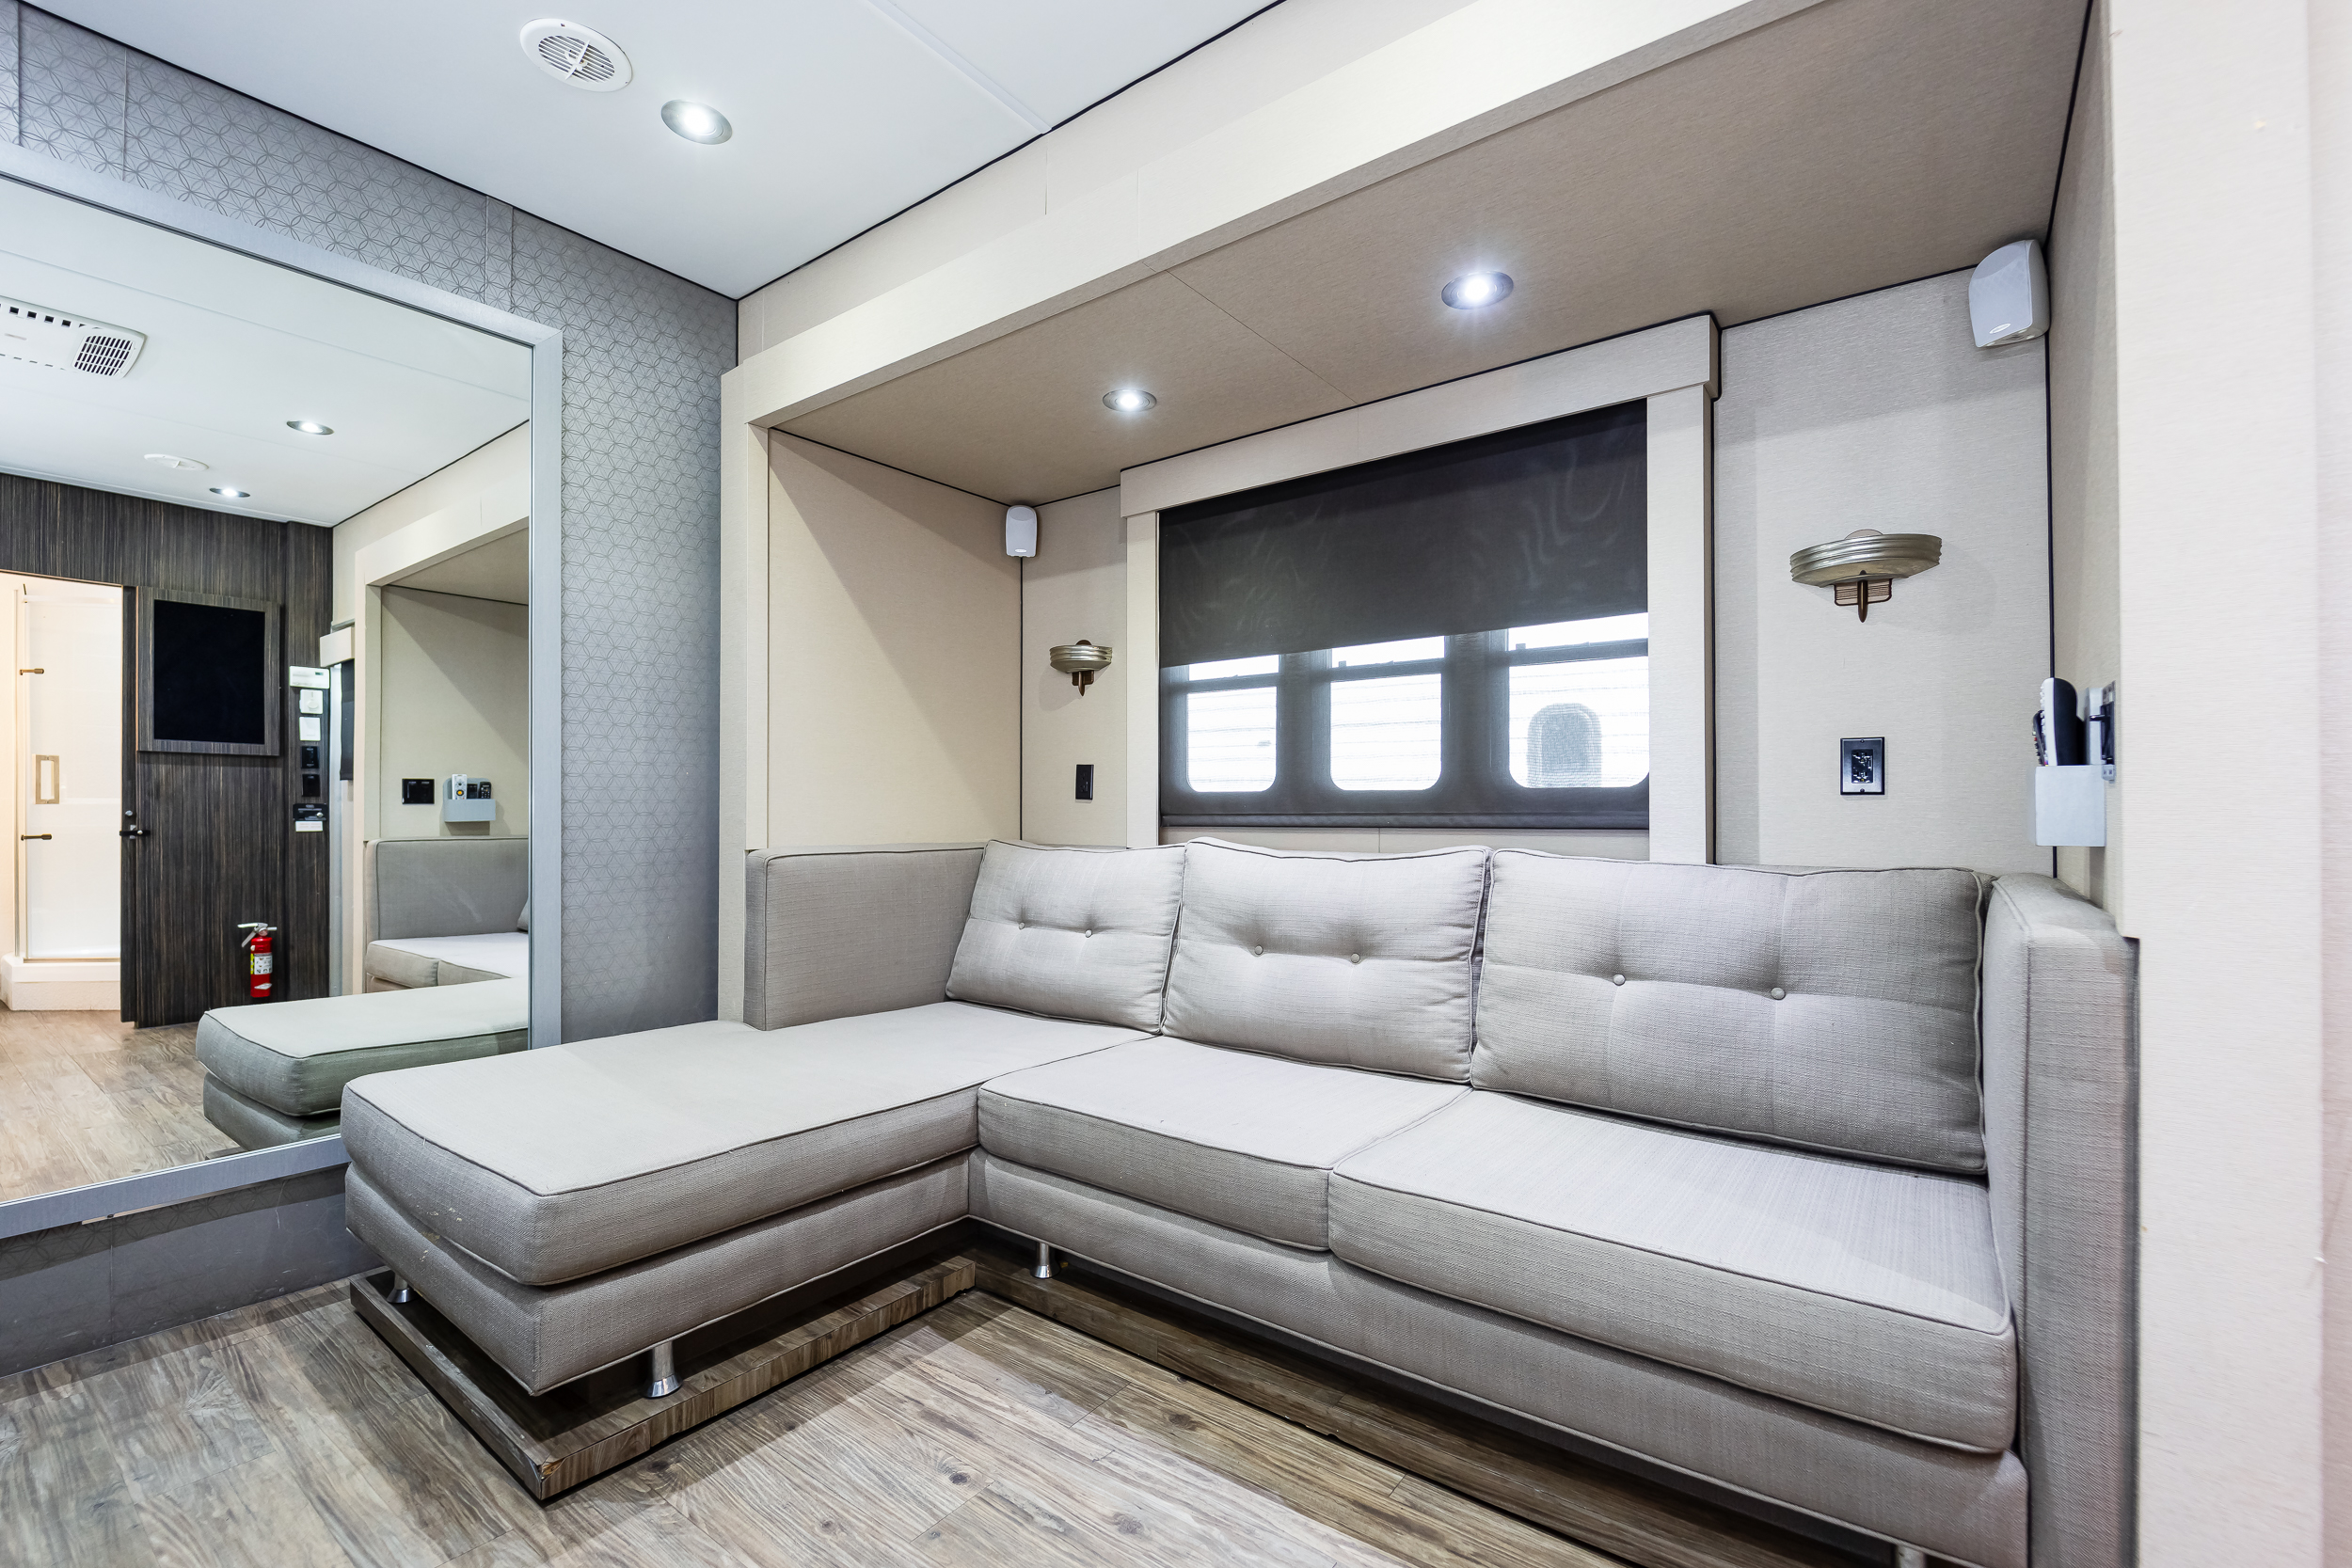 2X 40ft Luxury 2 Room Cast Trailer with Slide Outs Interior 3